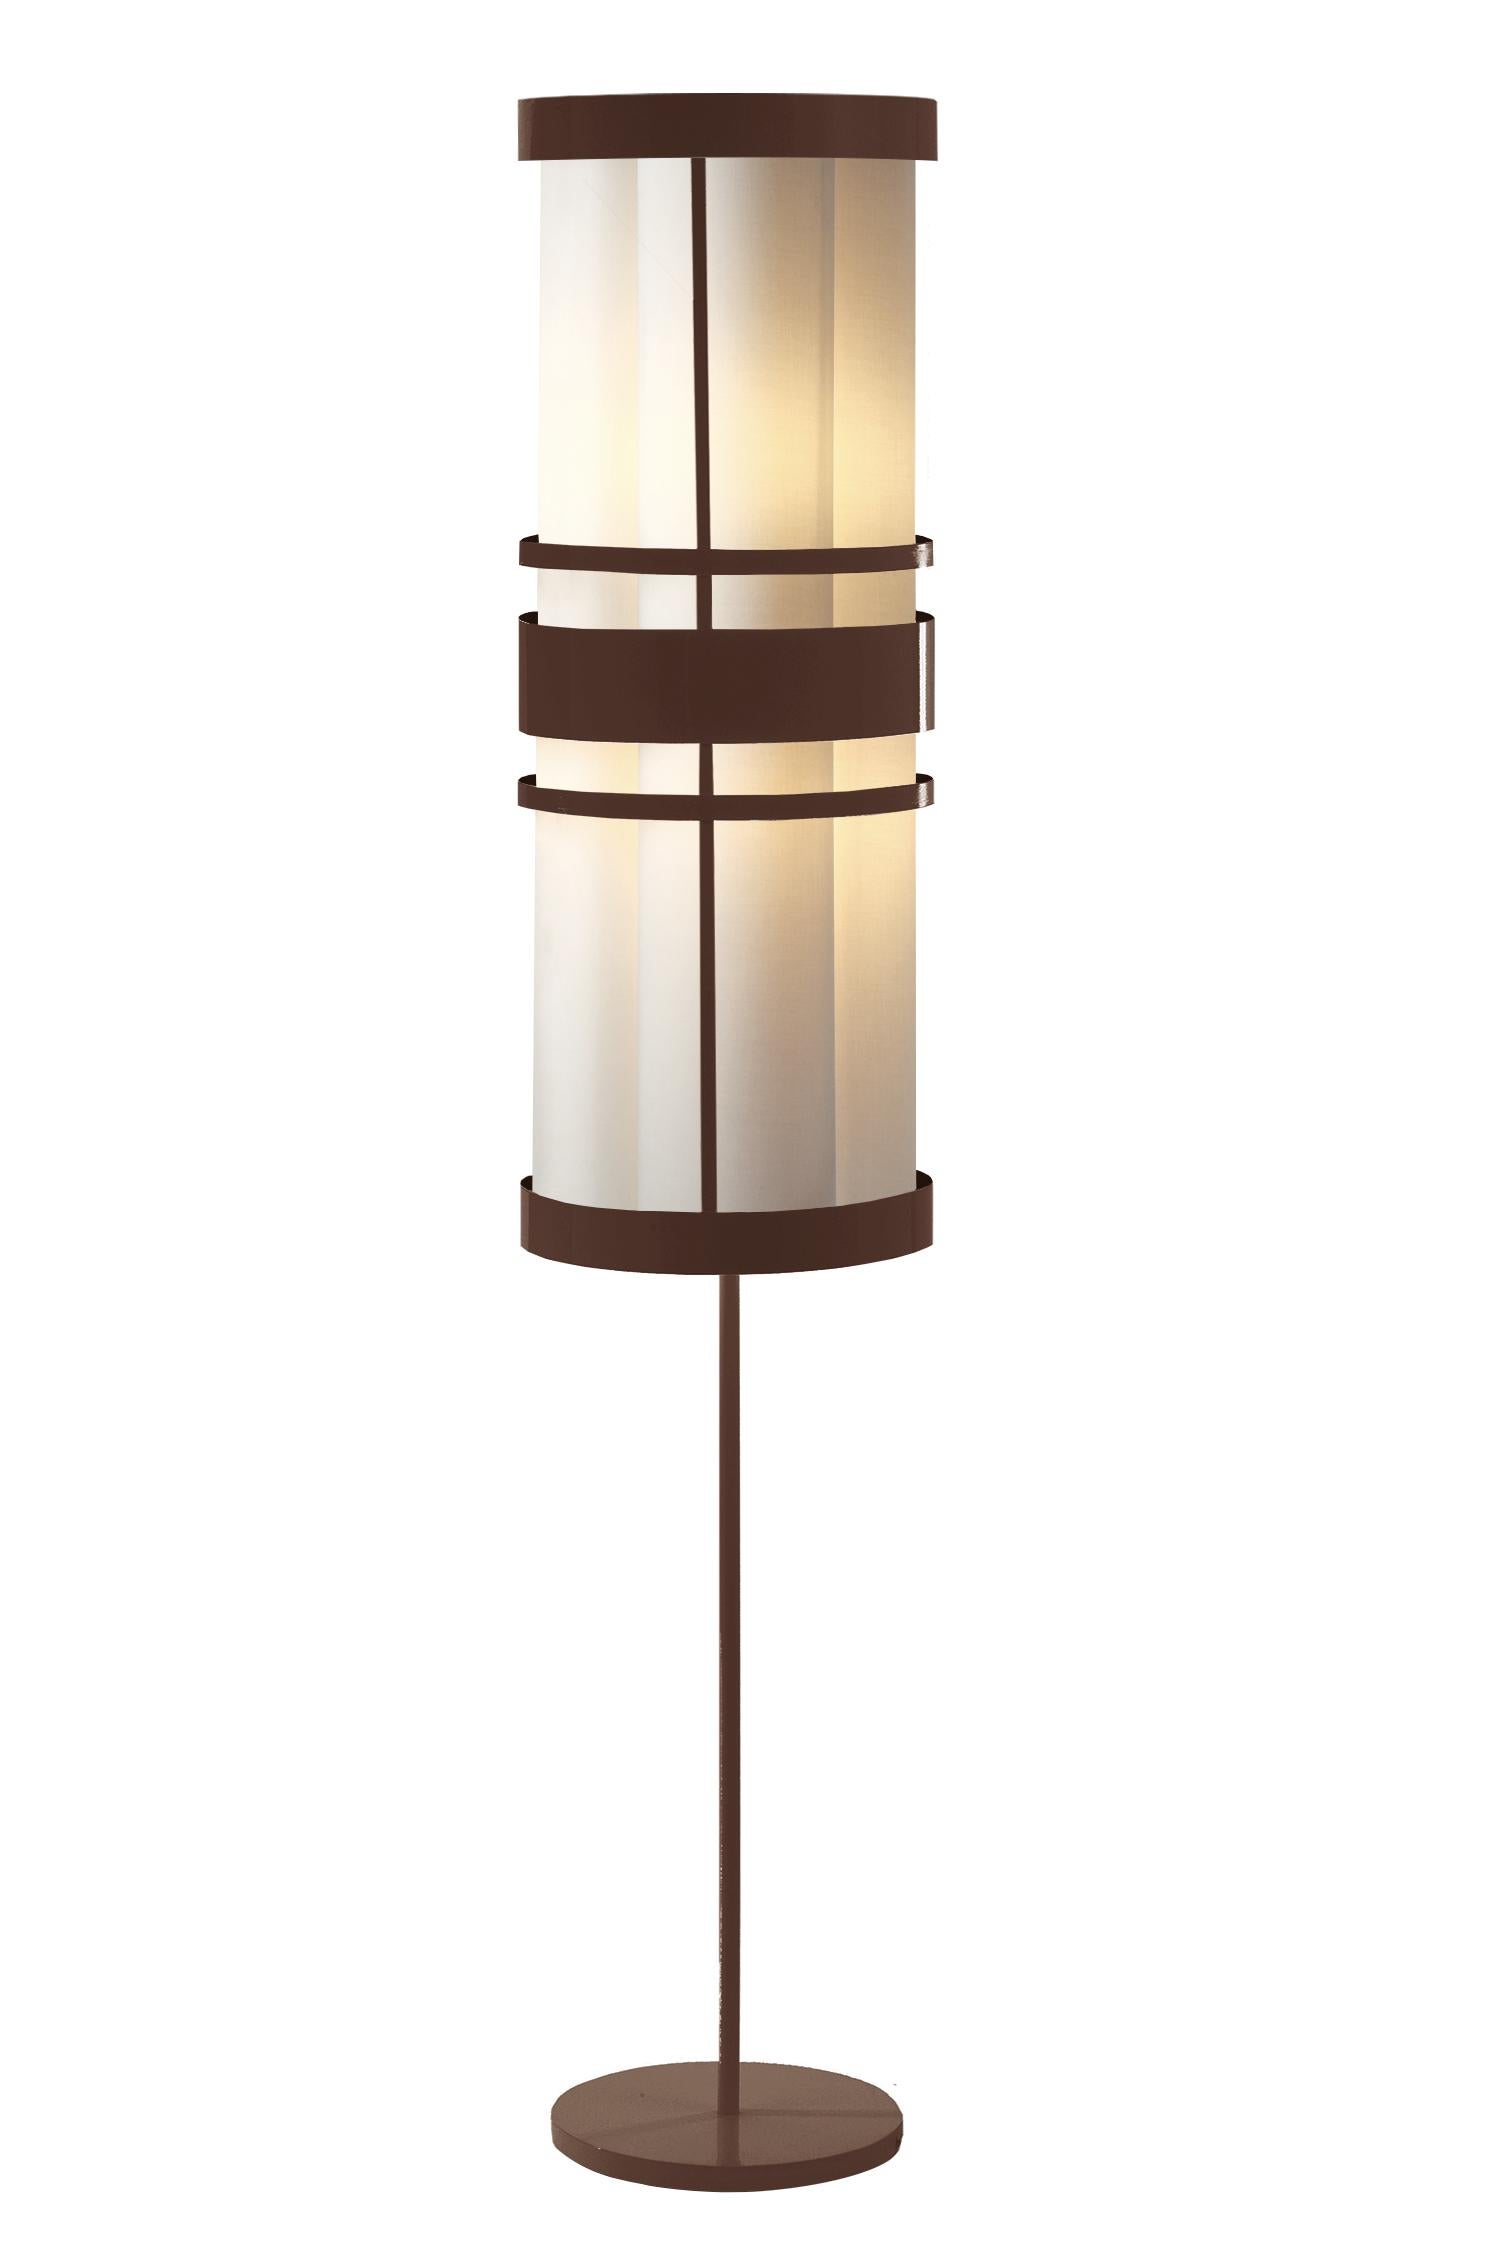 Lacquered Contemporary Art Deco Inspired Circus Floor Lamp Black Powder Coated For Sale